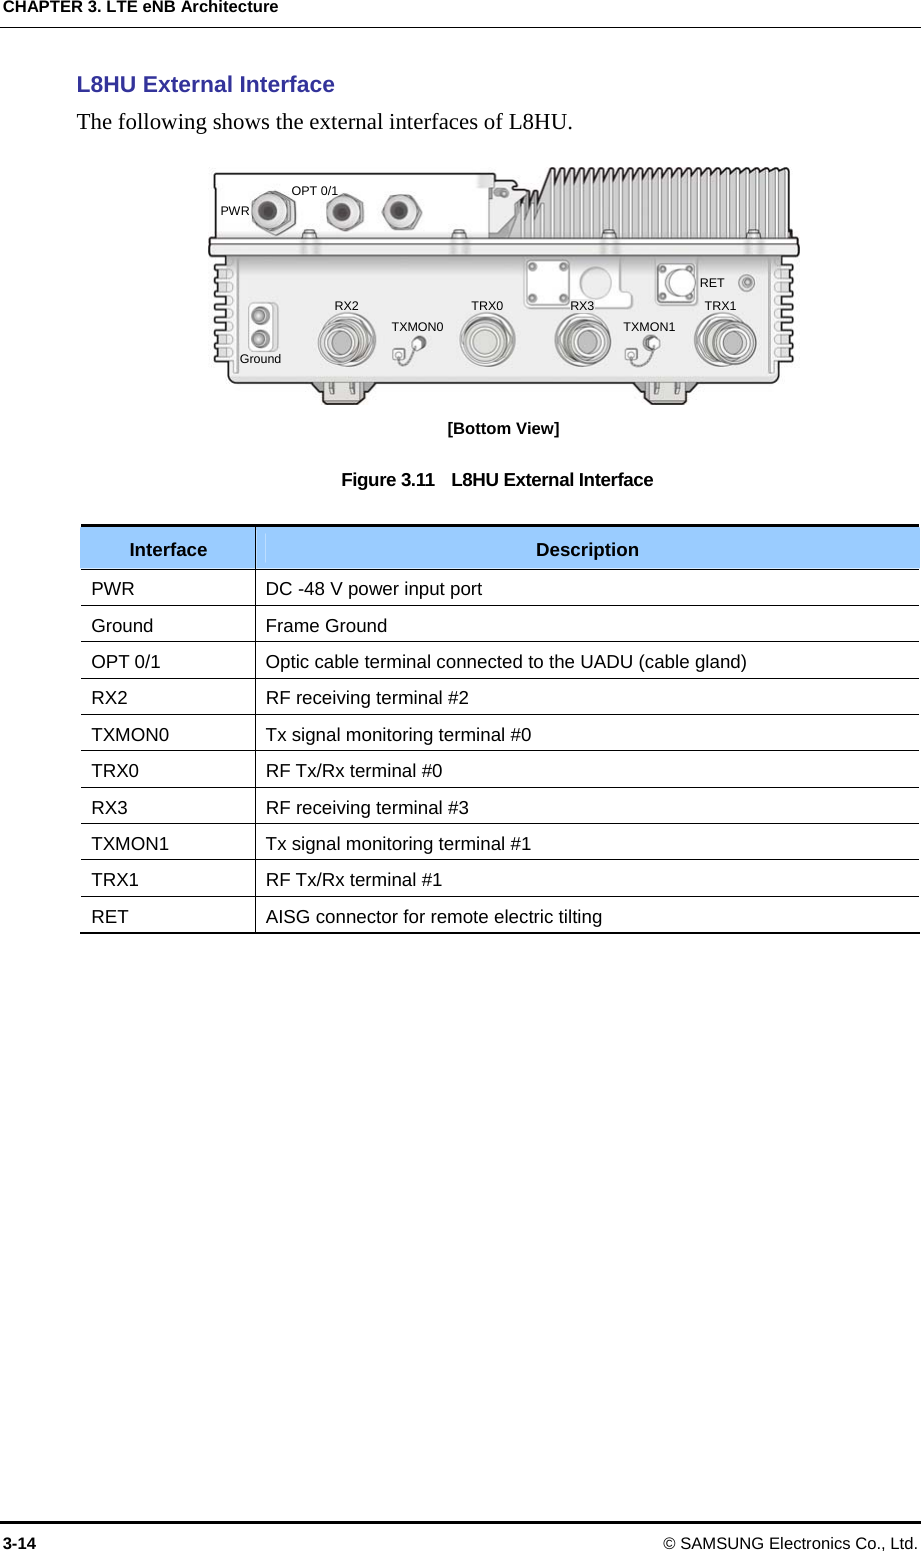 CHAPTER 3. LTE eNB Architecture L8HU External Interface The following shows the external interfaces of L8HU.  TXMON0 TXMON1 Ground TRX1 RX3TRX0 PWR OPT 0/1 RETRX2 [Bottom View] Figure 3.11  L8HU External Interface  Interface Description PWR  DC -48 V power input port Ground Frame Ground OPT 0/1  Optic cable terminal connected to the UADU (cable gland) RX2  RF receiving terminal #2 TXMON0  Tx signal monitoring terminal #0 TRX0  RF Tx/Rx terminal #0 RX3  RF receiving terminal #3 TXMON1  Tx signal monitoring terminal #1 TRX1  RF Tx/Rx terminal #1 RET  AISG connector for remote electric tilting  3-14 © SAMSUNG Electronics Co., Ltd. 